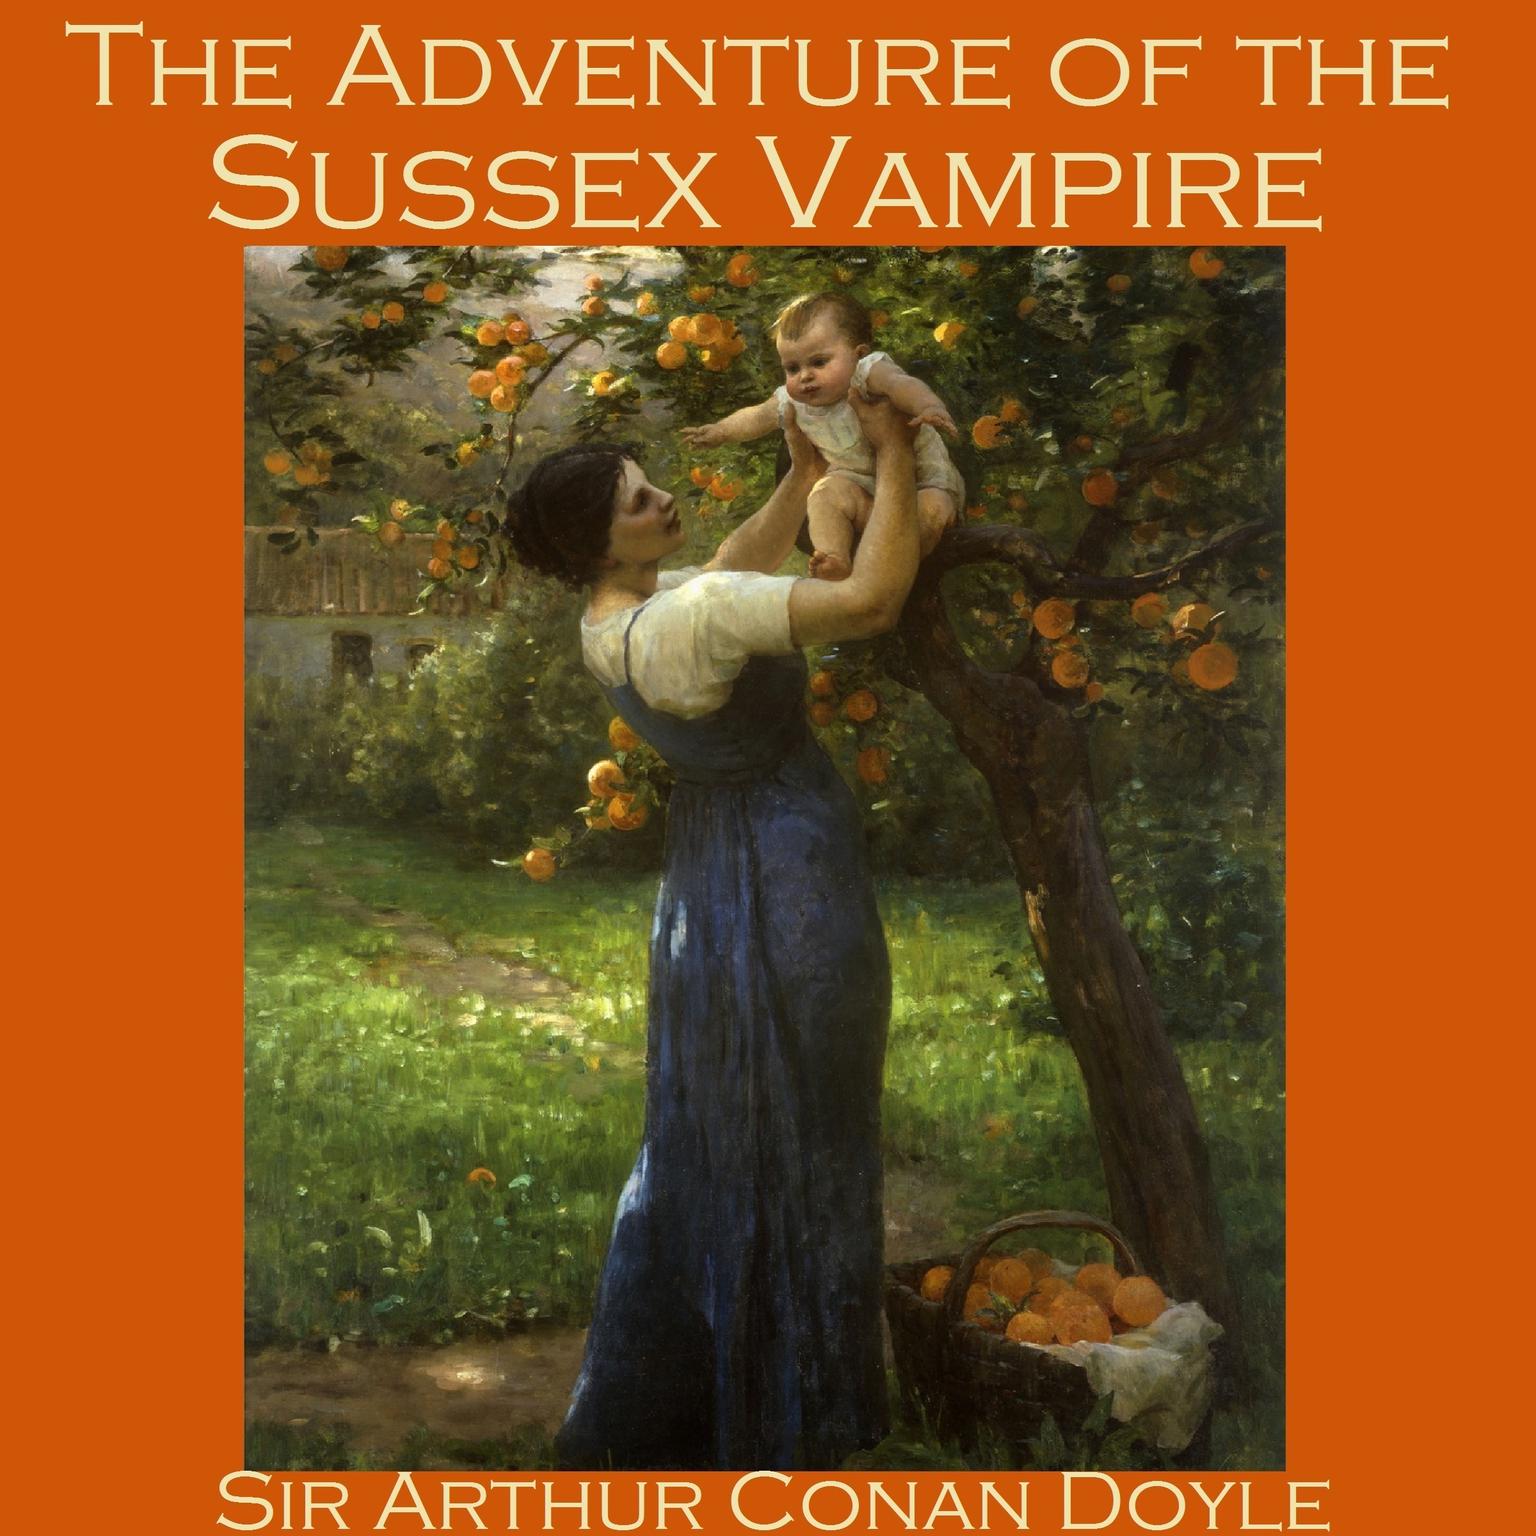 The Adventure of the Sussex Vampire Audiobook, by Arthur Conan Doyle